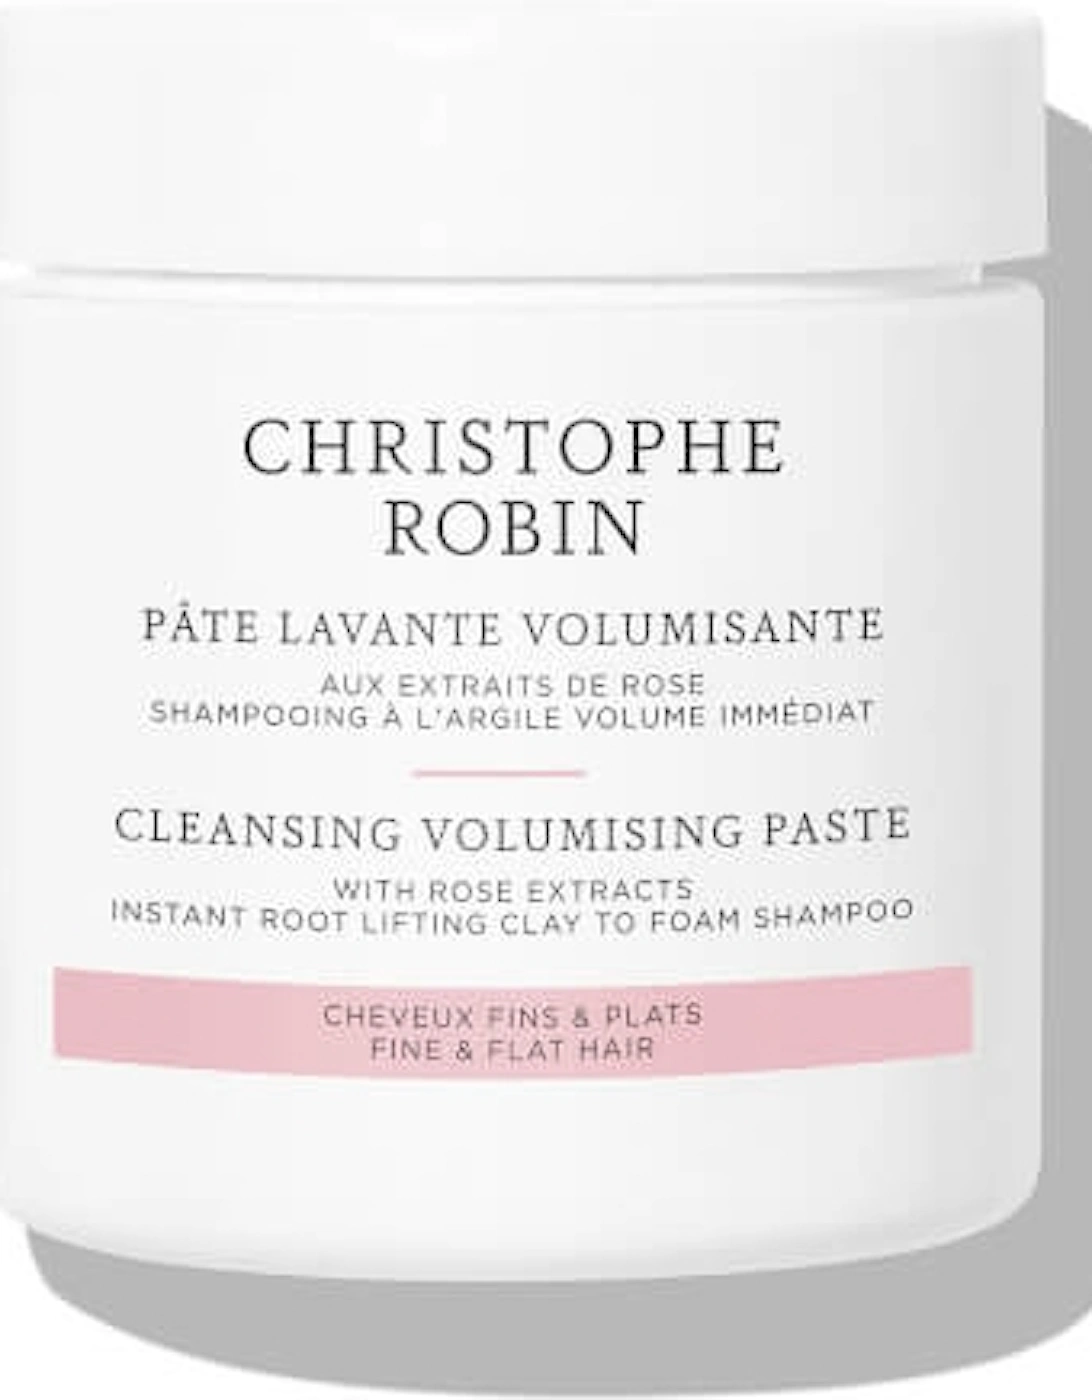 Cleansing Volumising Paste with Pure Rassoul Clay and Rose 75ml - Christophe Robin, 2 of 1